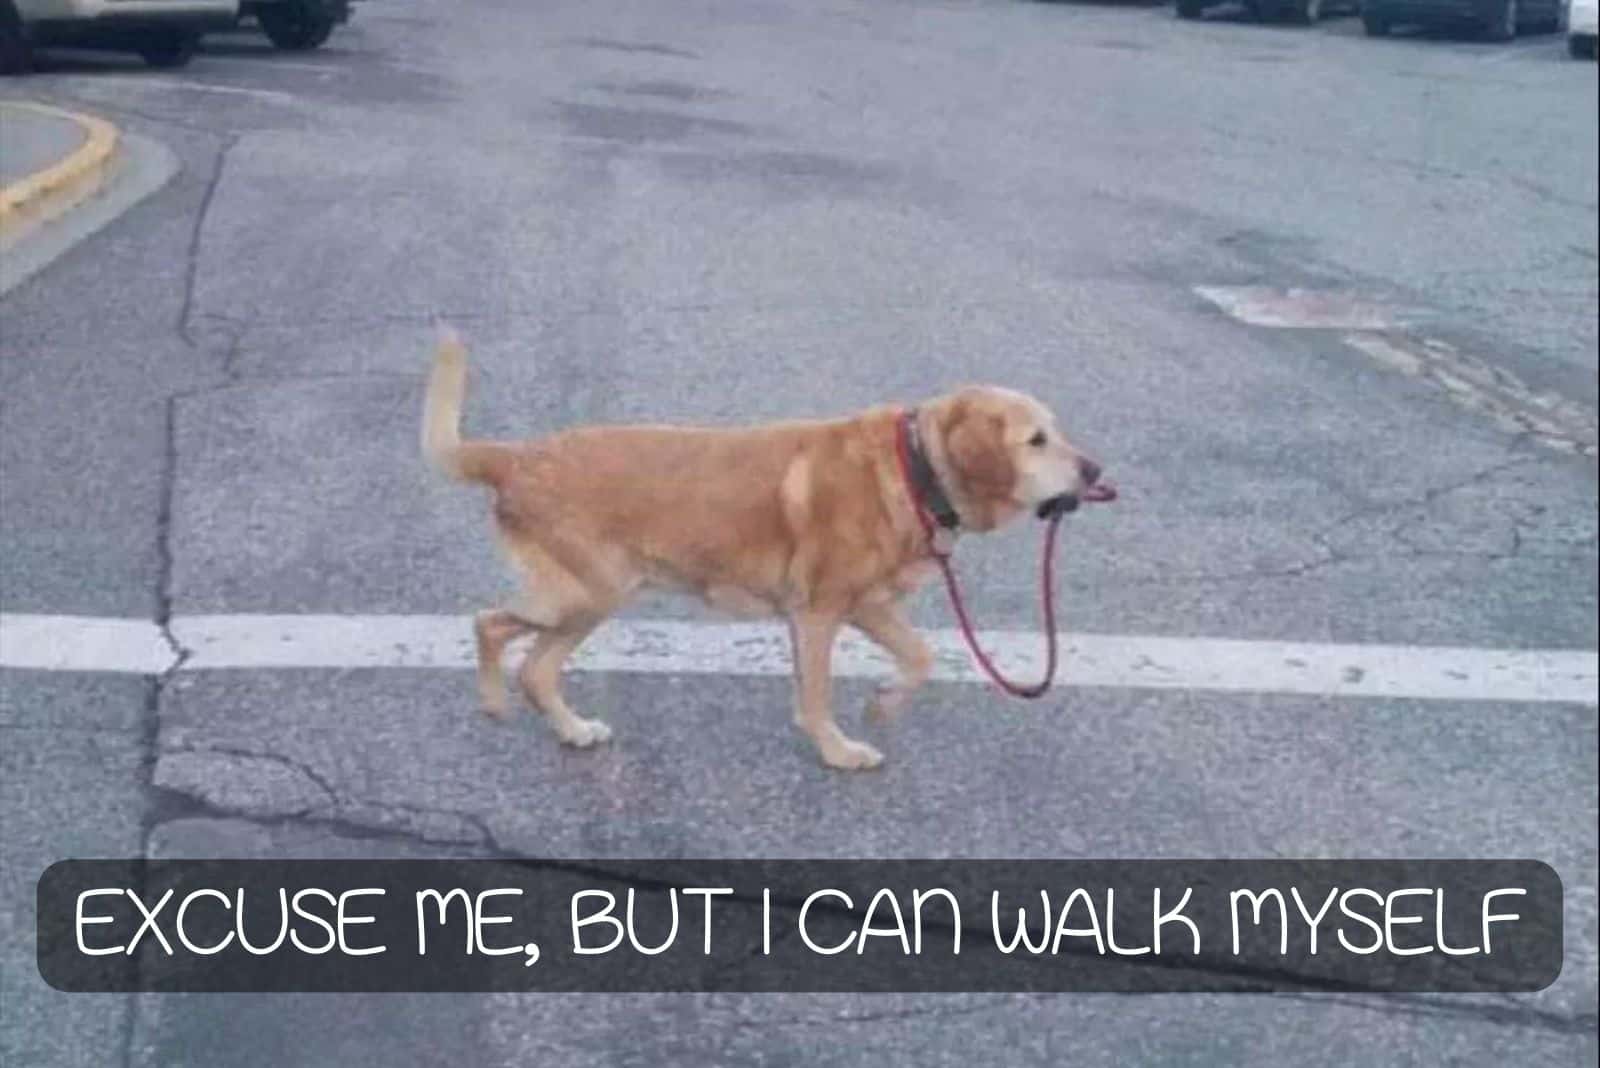 dog walking on a road with leash in his mouth